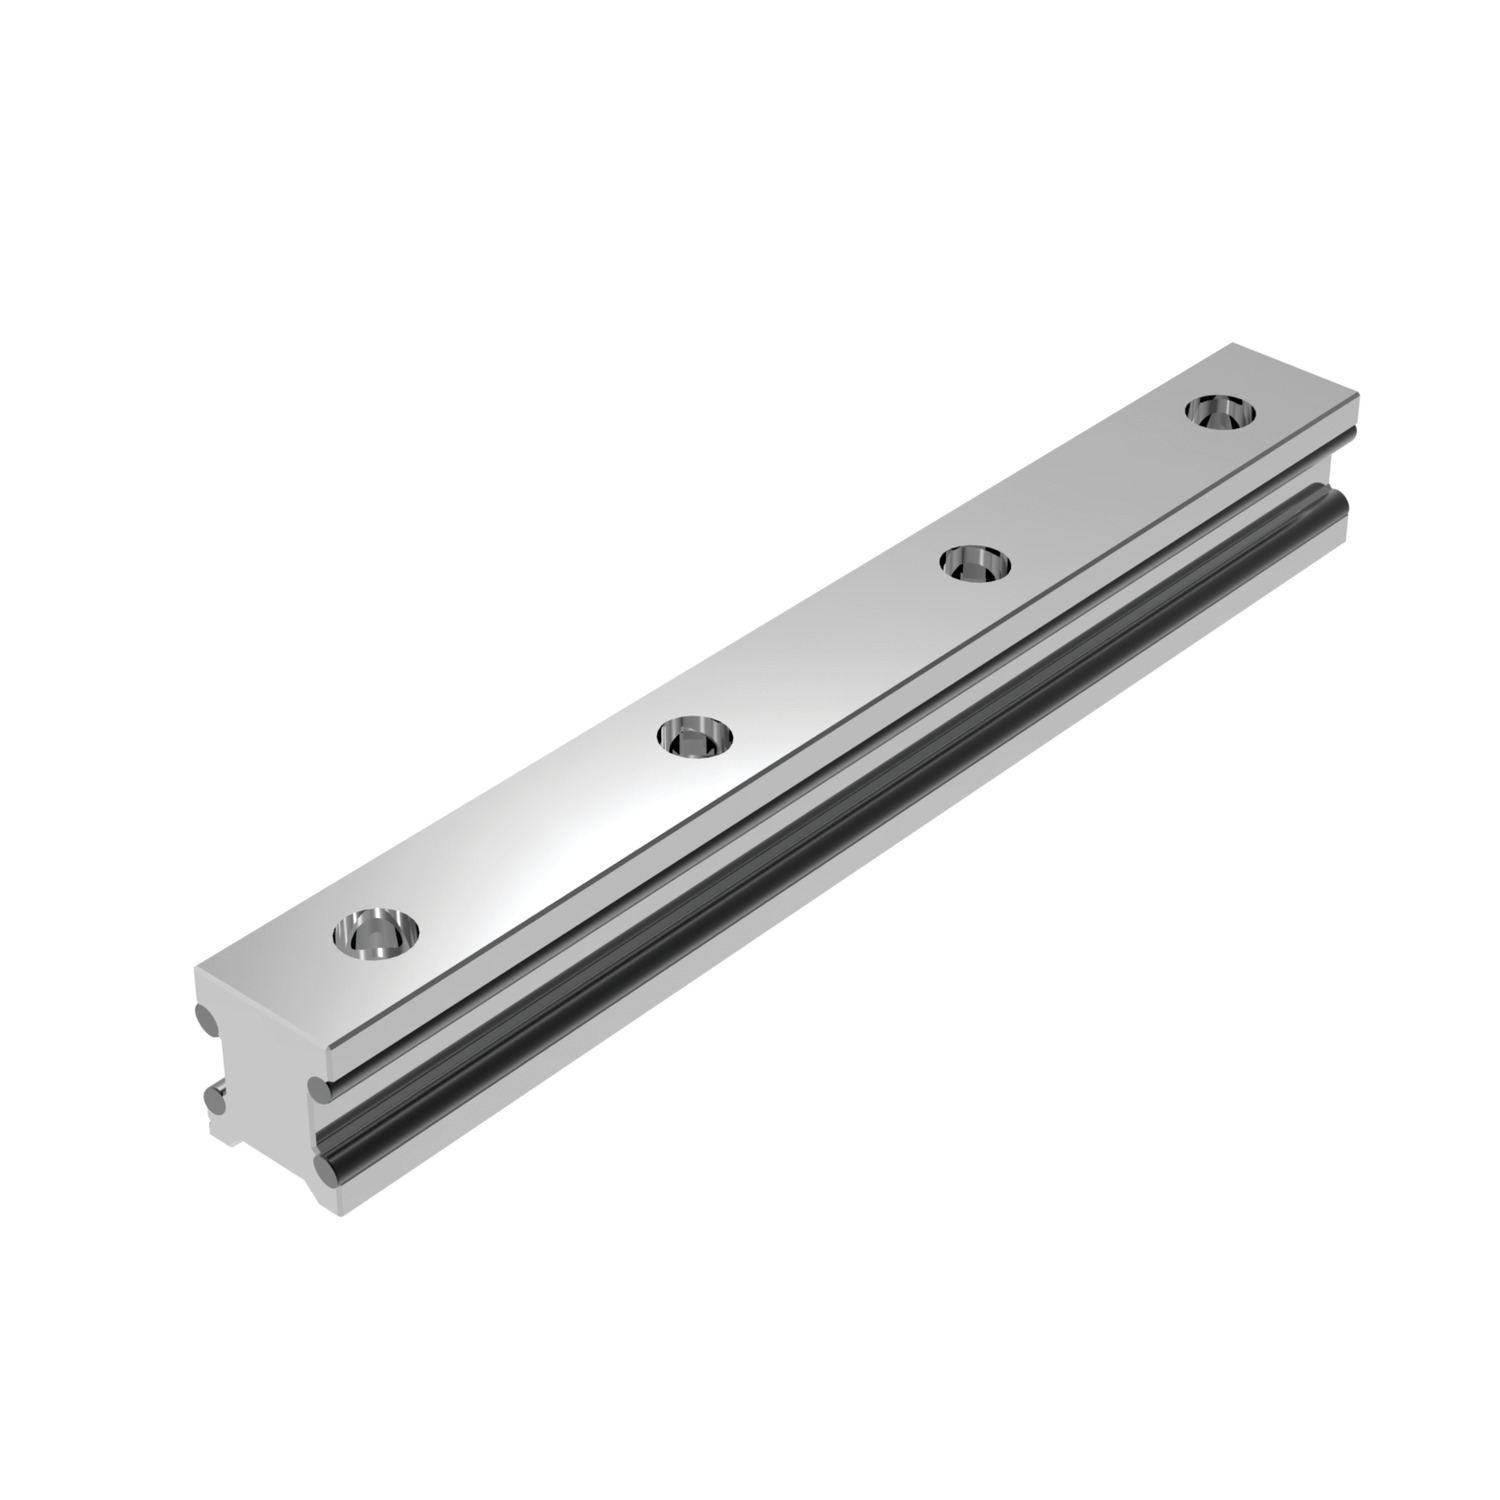 Product L1018.20, 20mm Aluminium Linear Guide Rail with stainless raceways / 